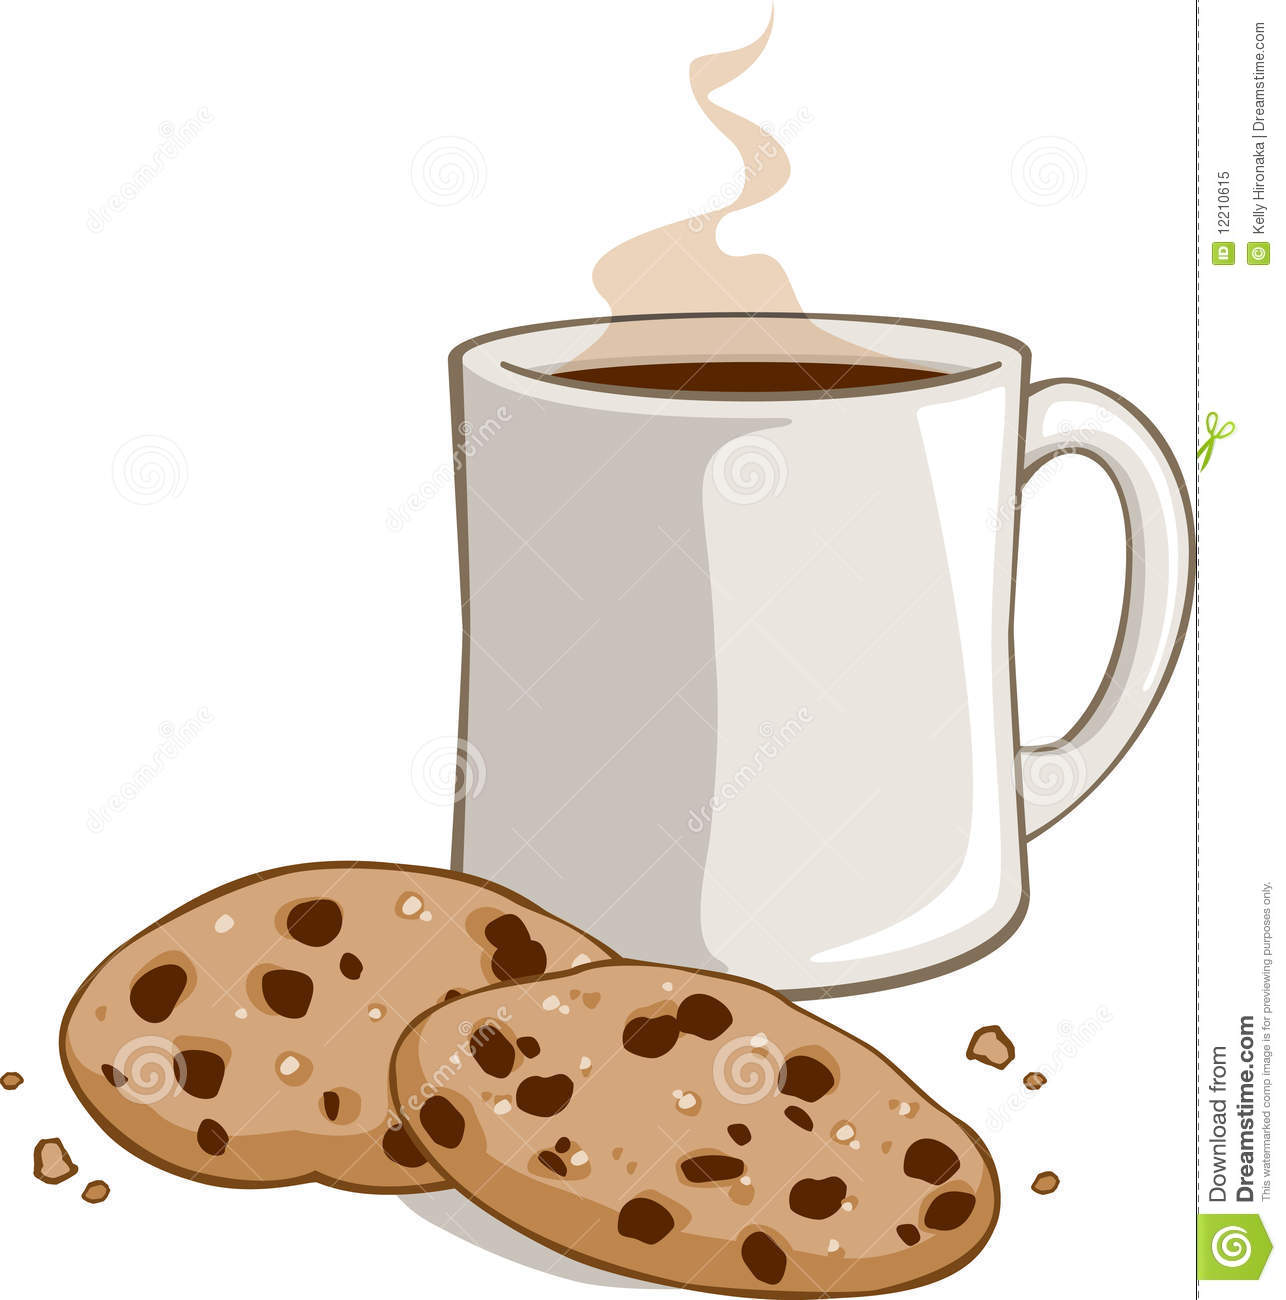 Cookies And Cocoa Royalty Free Stock Photo   Image  12210615